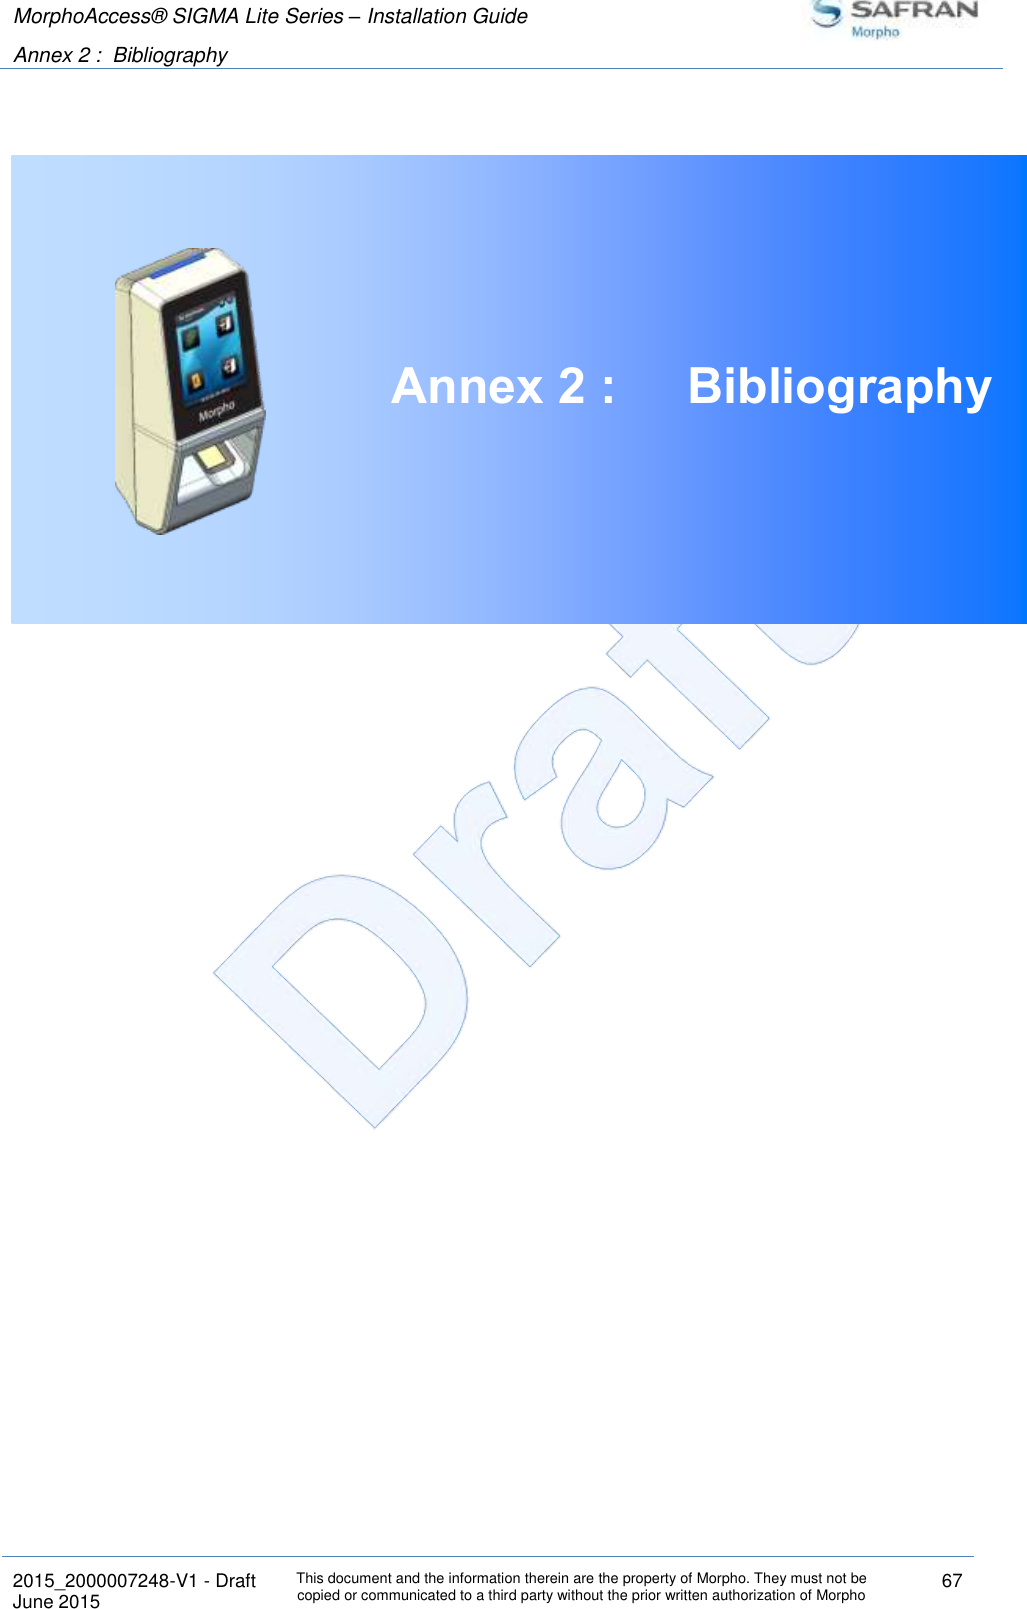 MorphoAccess® SIGMA Lite Series – Installation Guide  Annex 2 :  Bibliography   2015_2000007248-V1 - Draft This document and the information therein are the property of Morpho. They must not be copied or communicated to a third party without the prior written authorization of Morpho 67 June 2015    Annex 2 :  Bibliography     